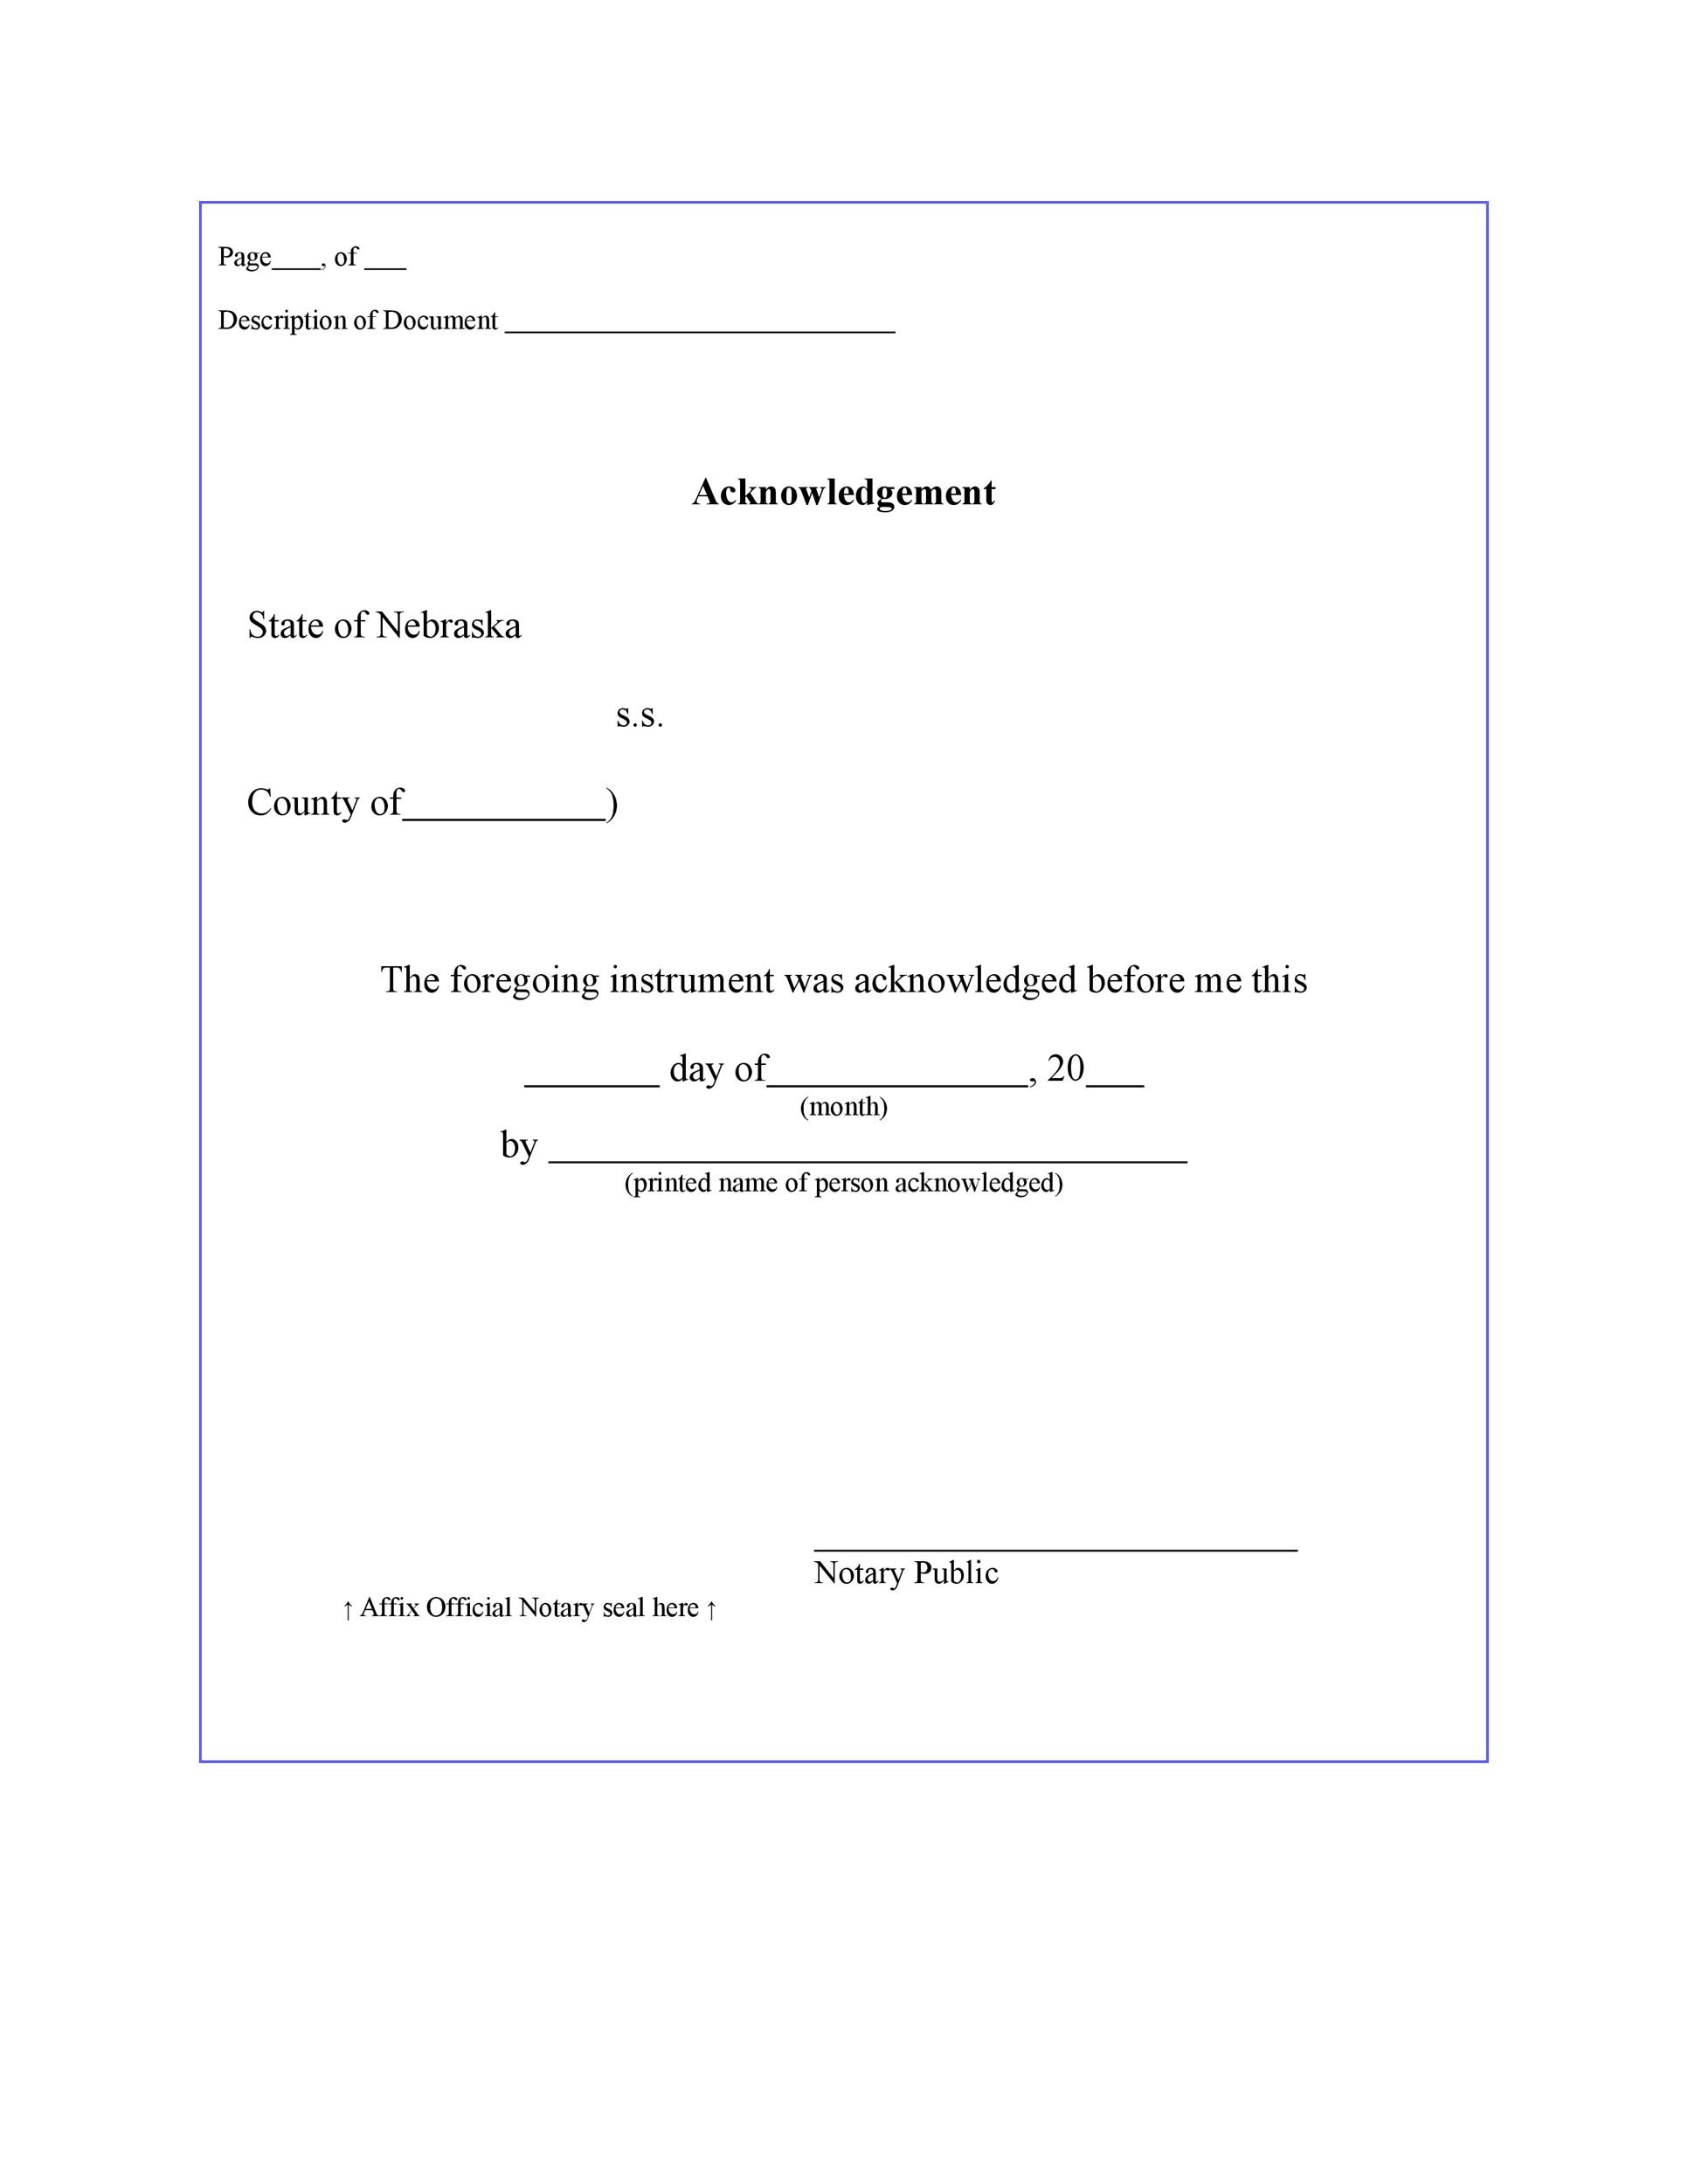 40 Free Notary Acknowledgement & Statement Templates ᐅ TemplateLab